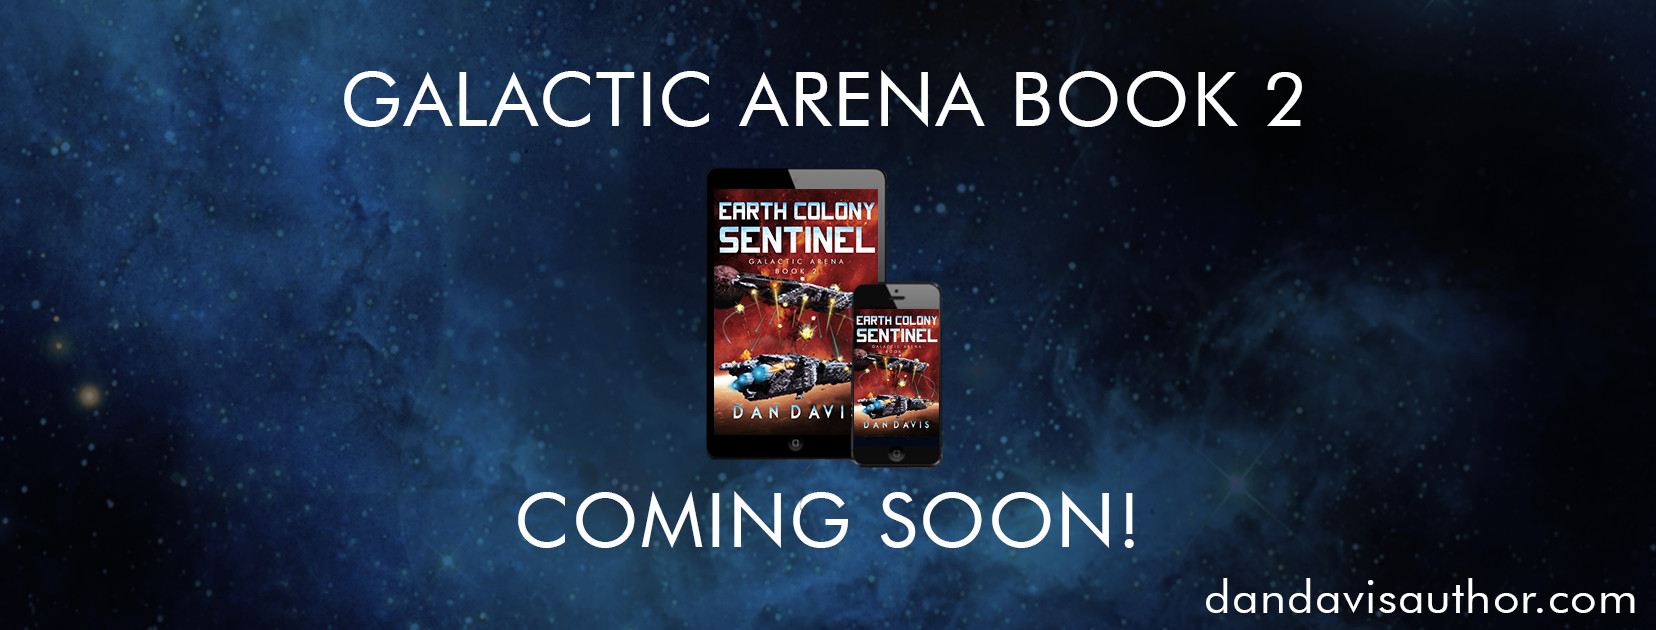 Earth Colony Sentinel is almost here #scifi #sequel